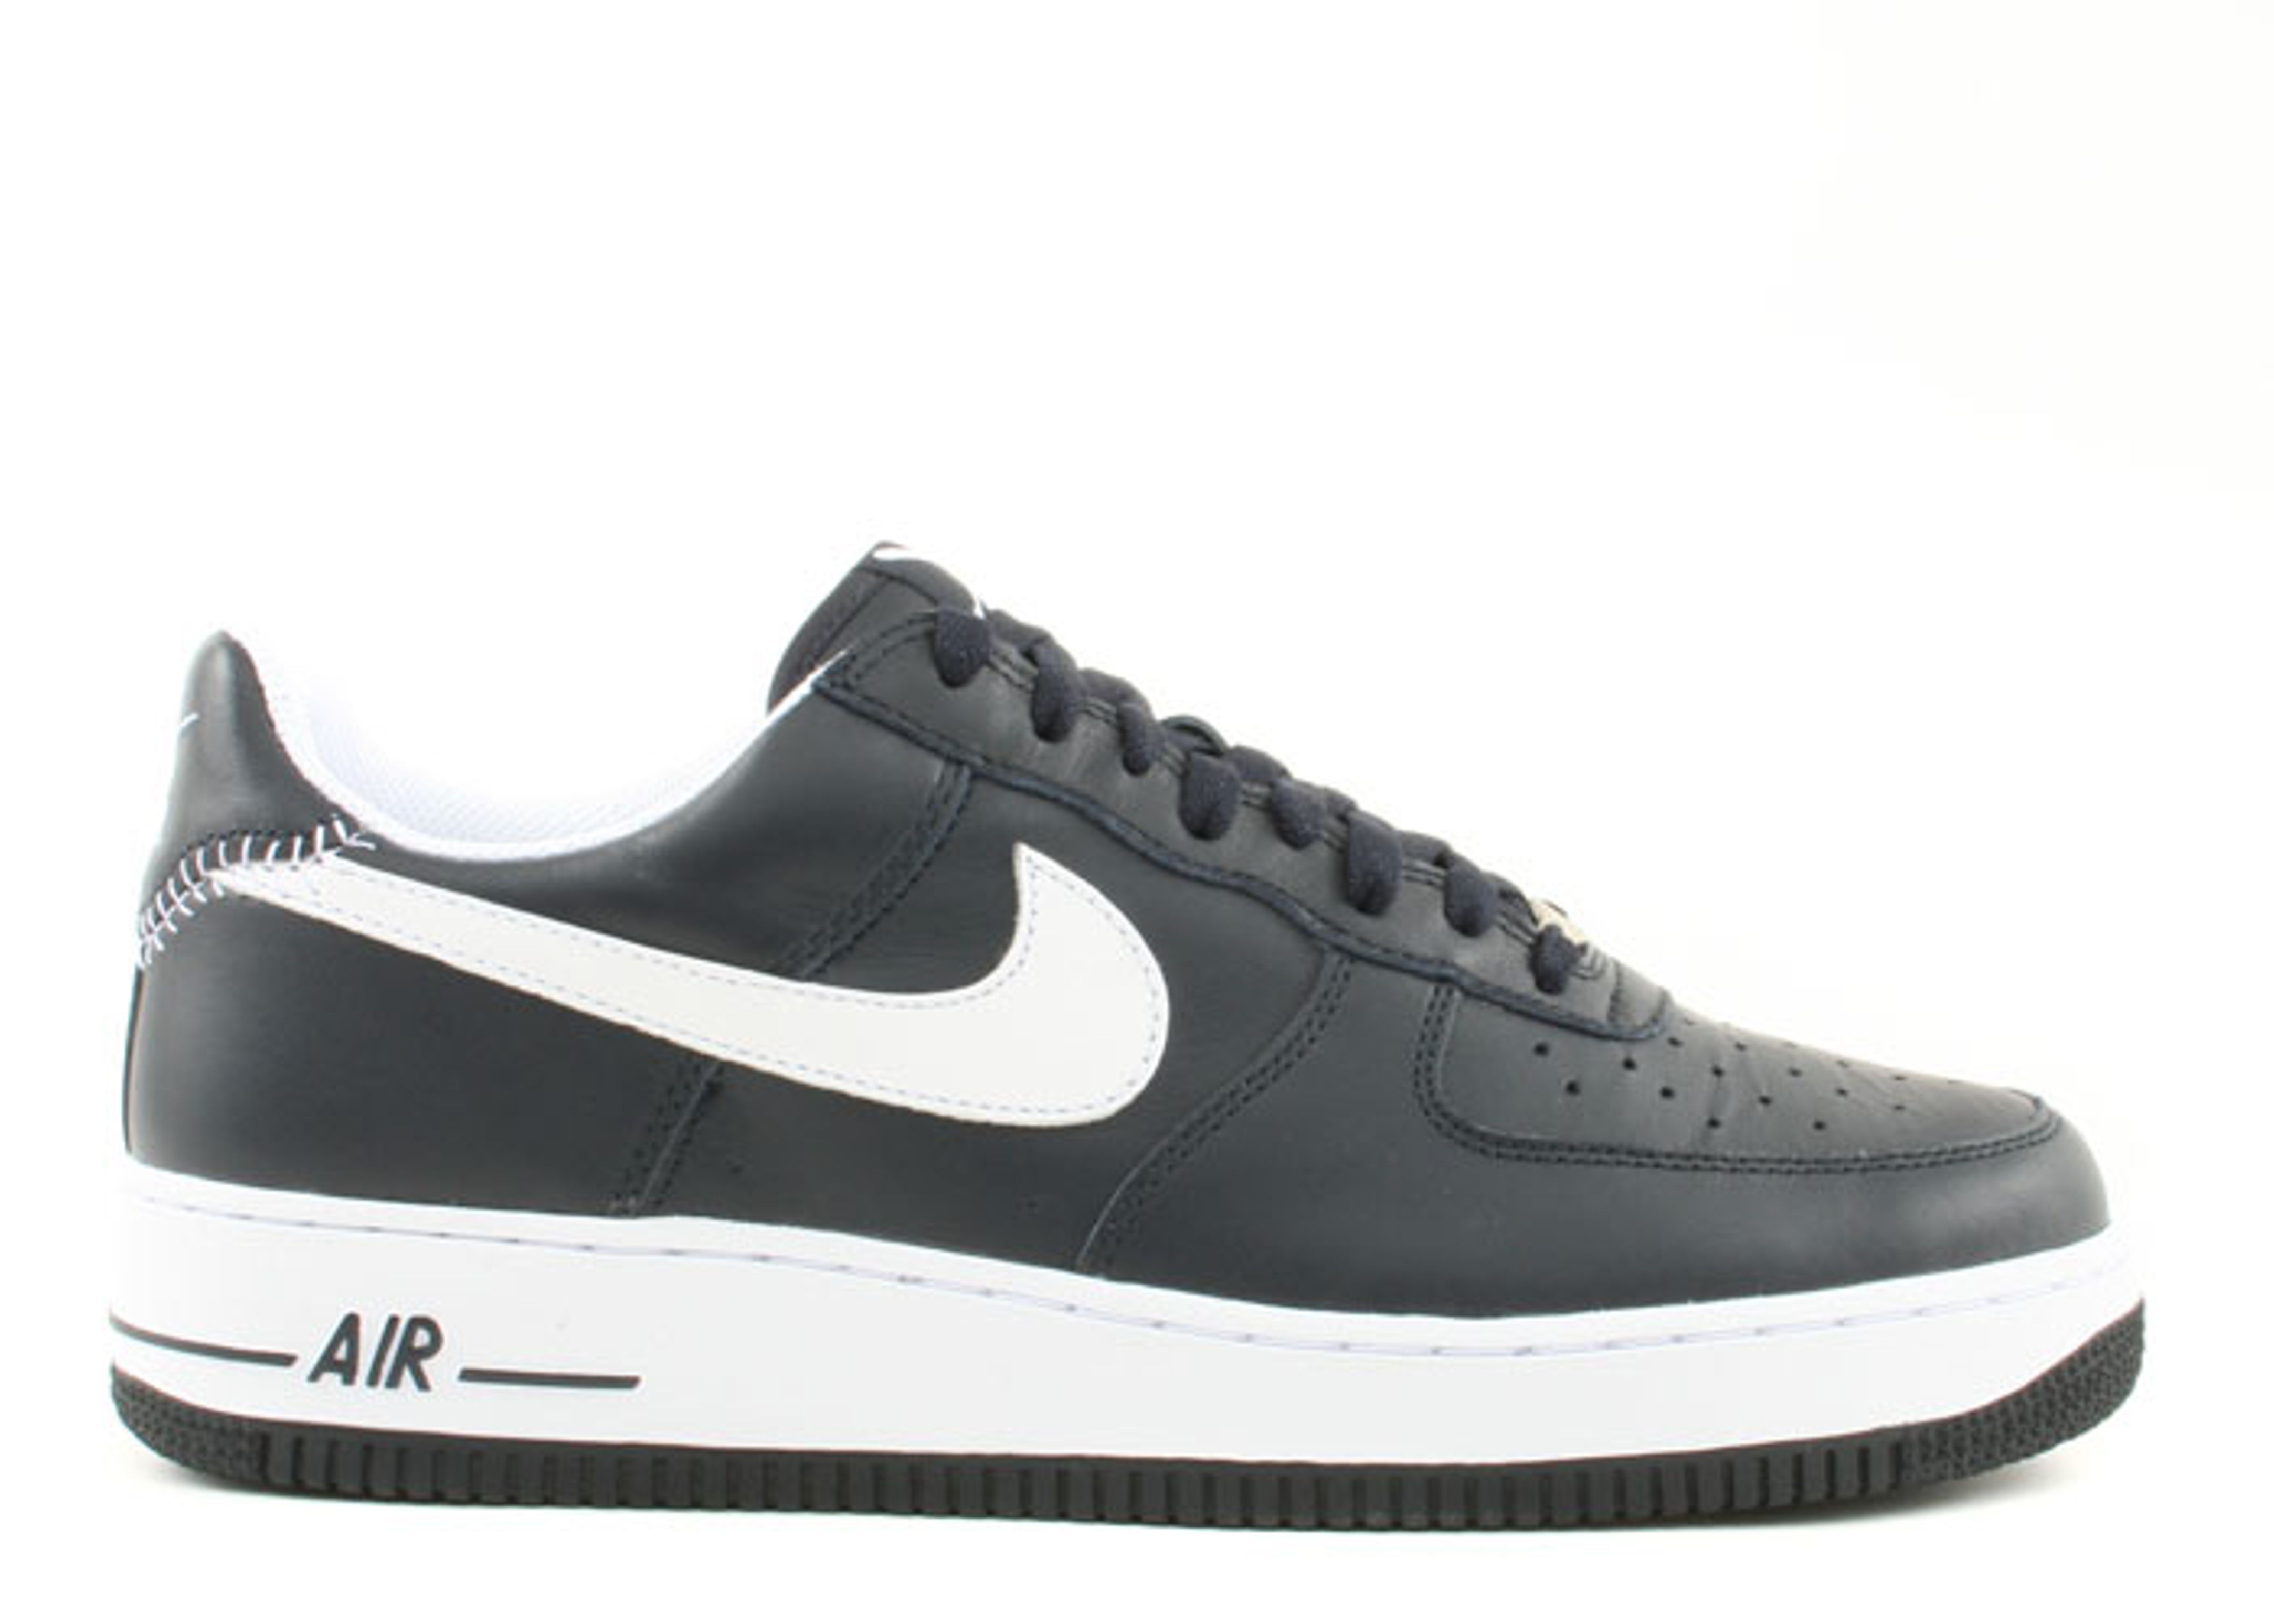 Nike Air Force 1 Premium Yankees Obsidian Leather 306353-412 Men’s 12 Shoes